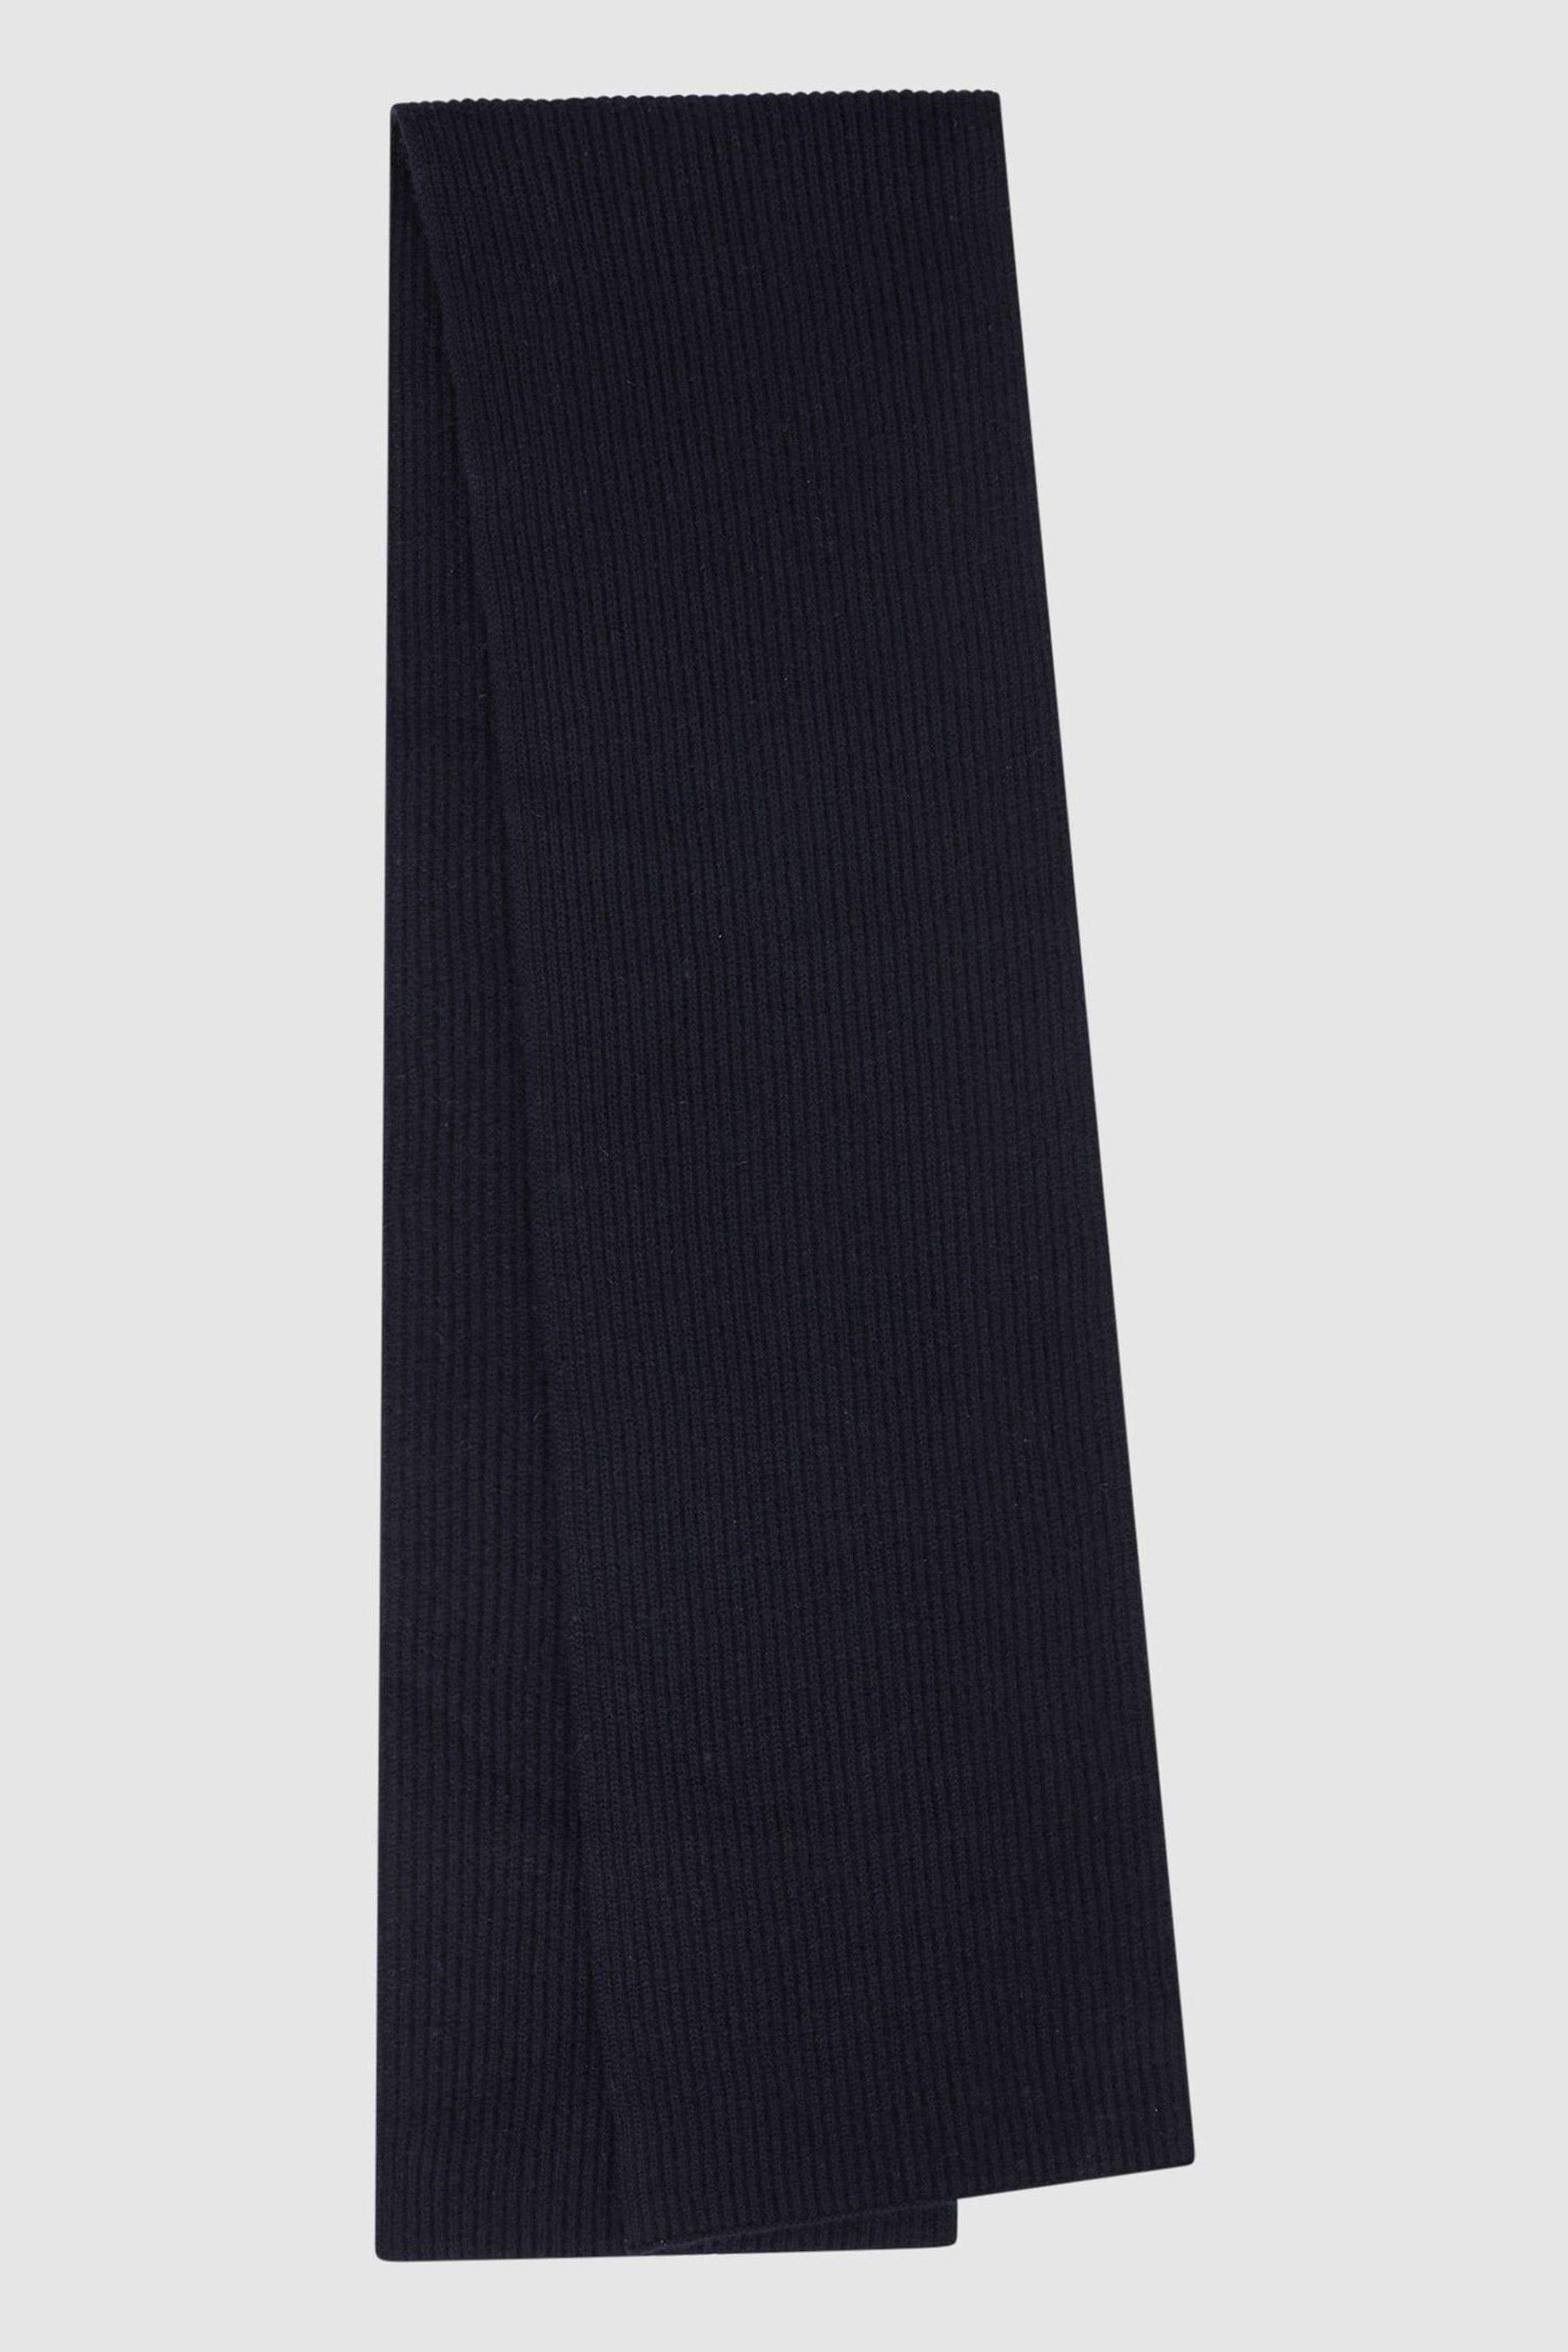 Reiss Alderny - Navy Cashmere Ribbed Scarf, One